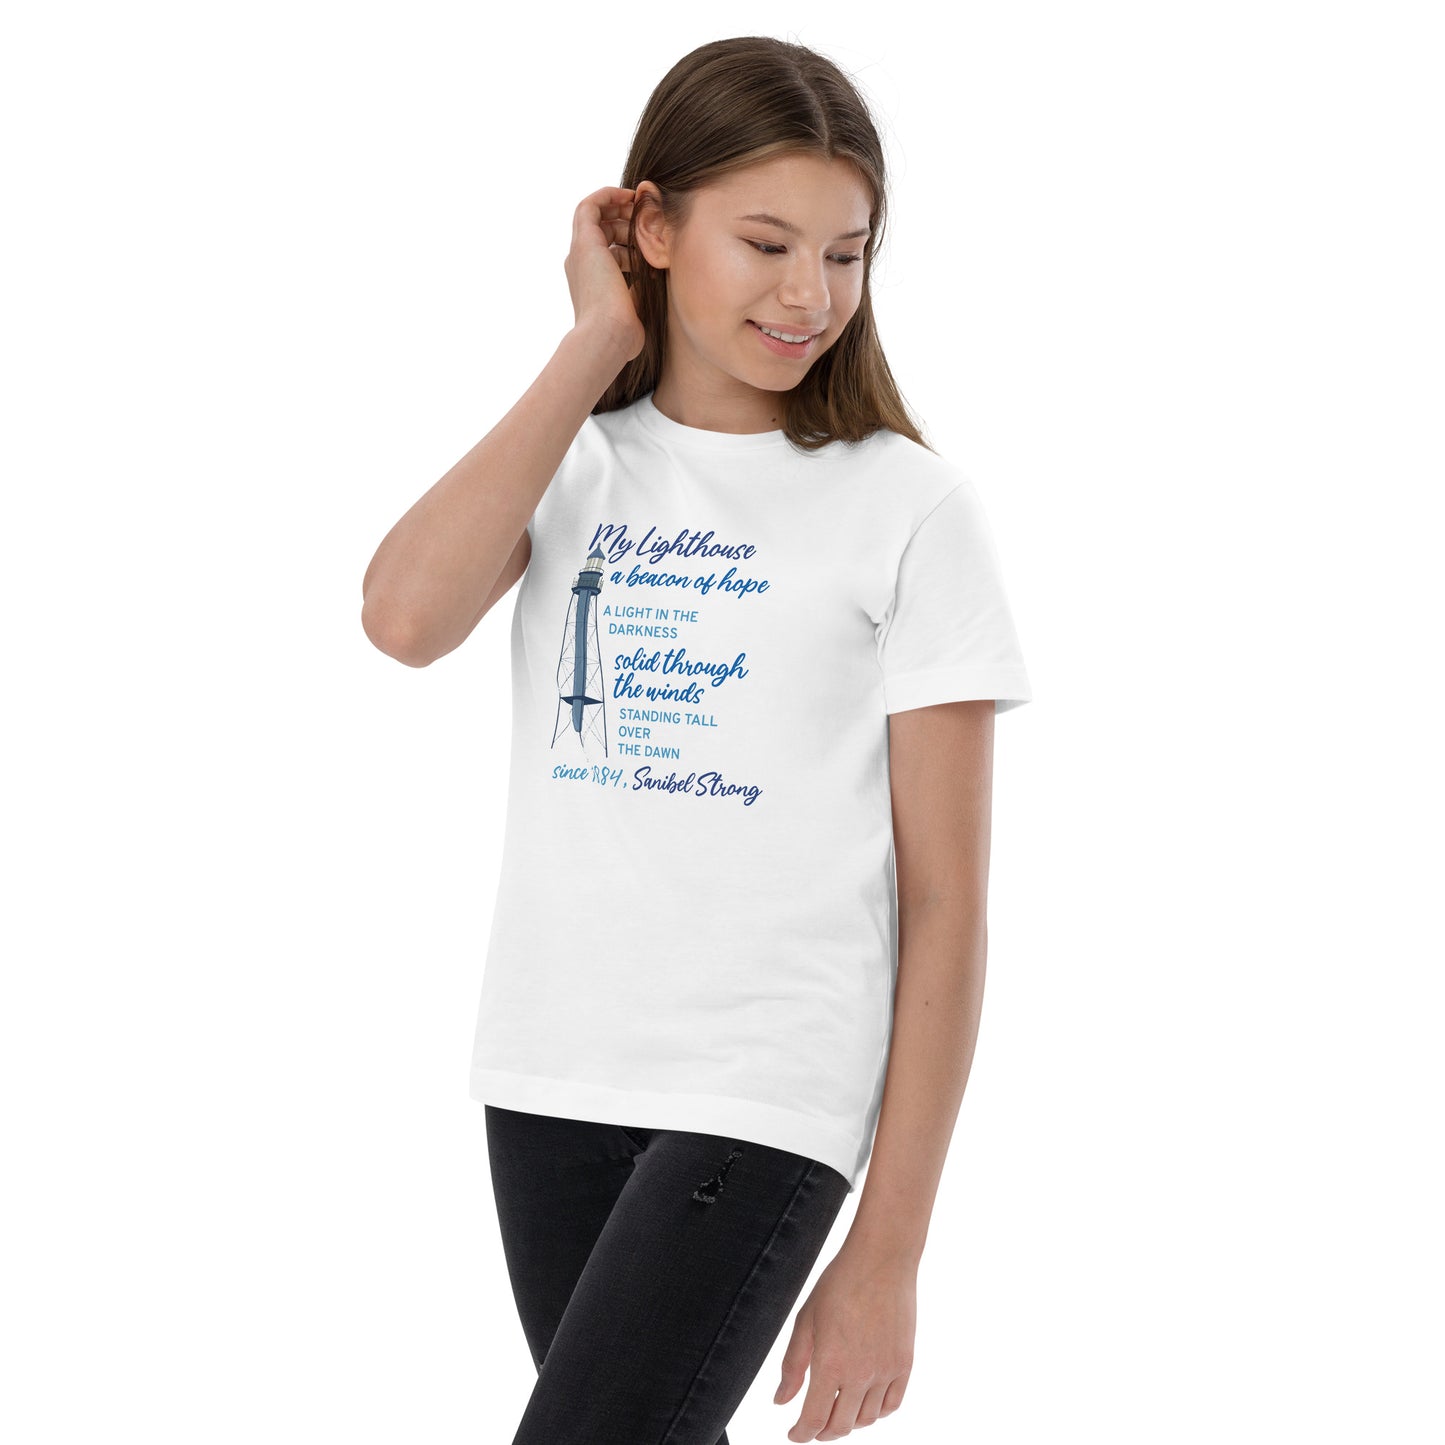 My Lighthouse Poem - Youth T-shirt